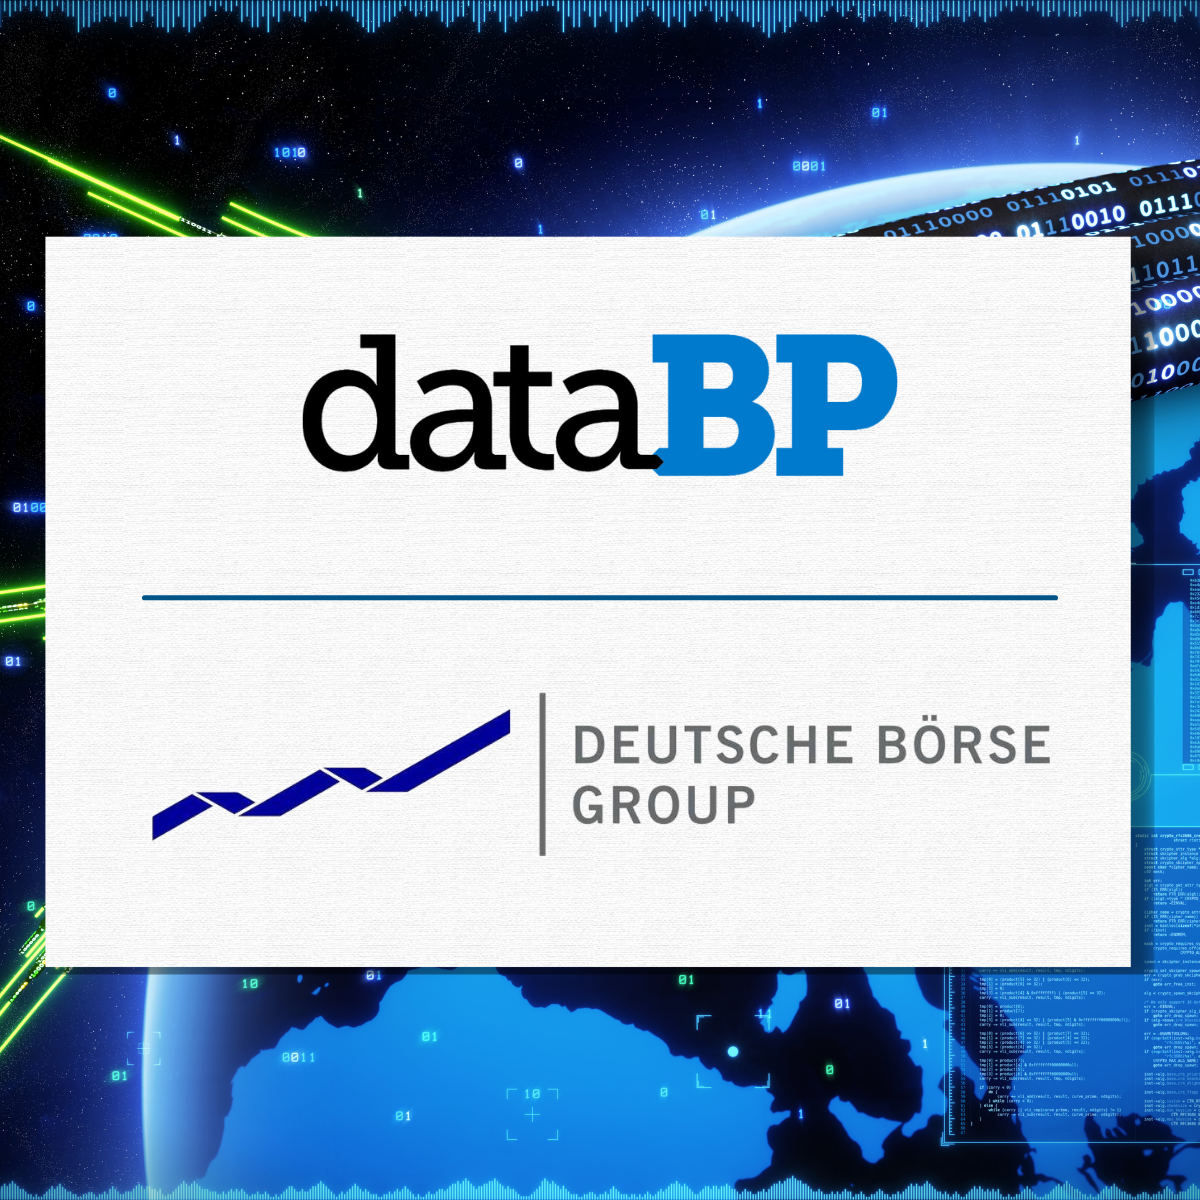 Driving data licensing digitization with DataBP!